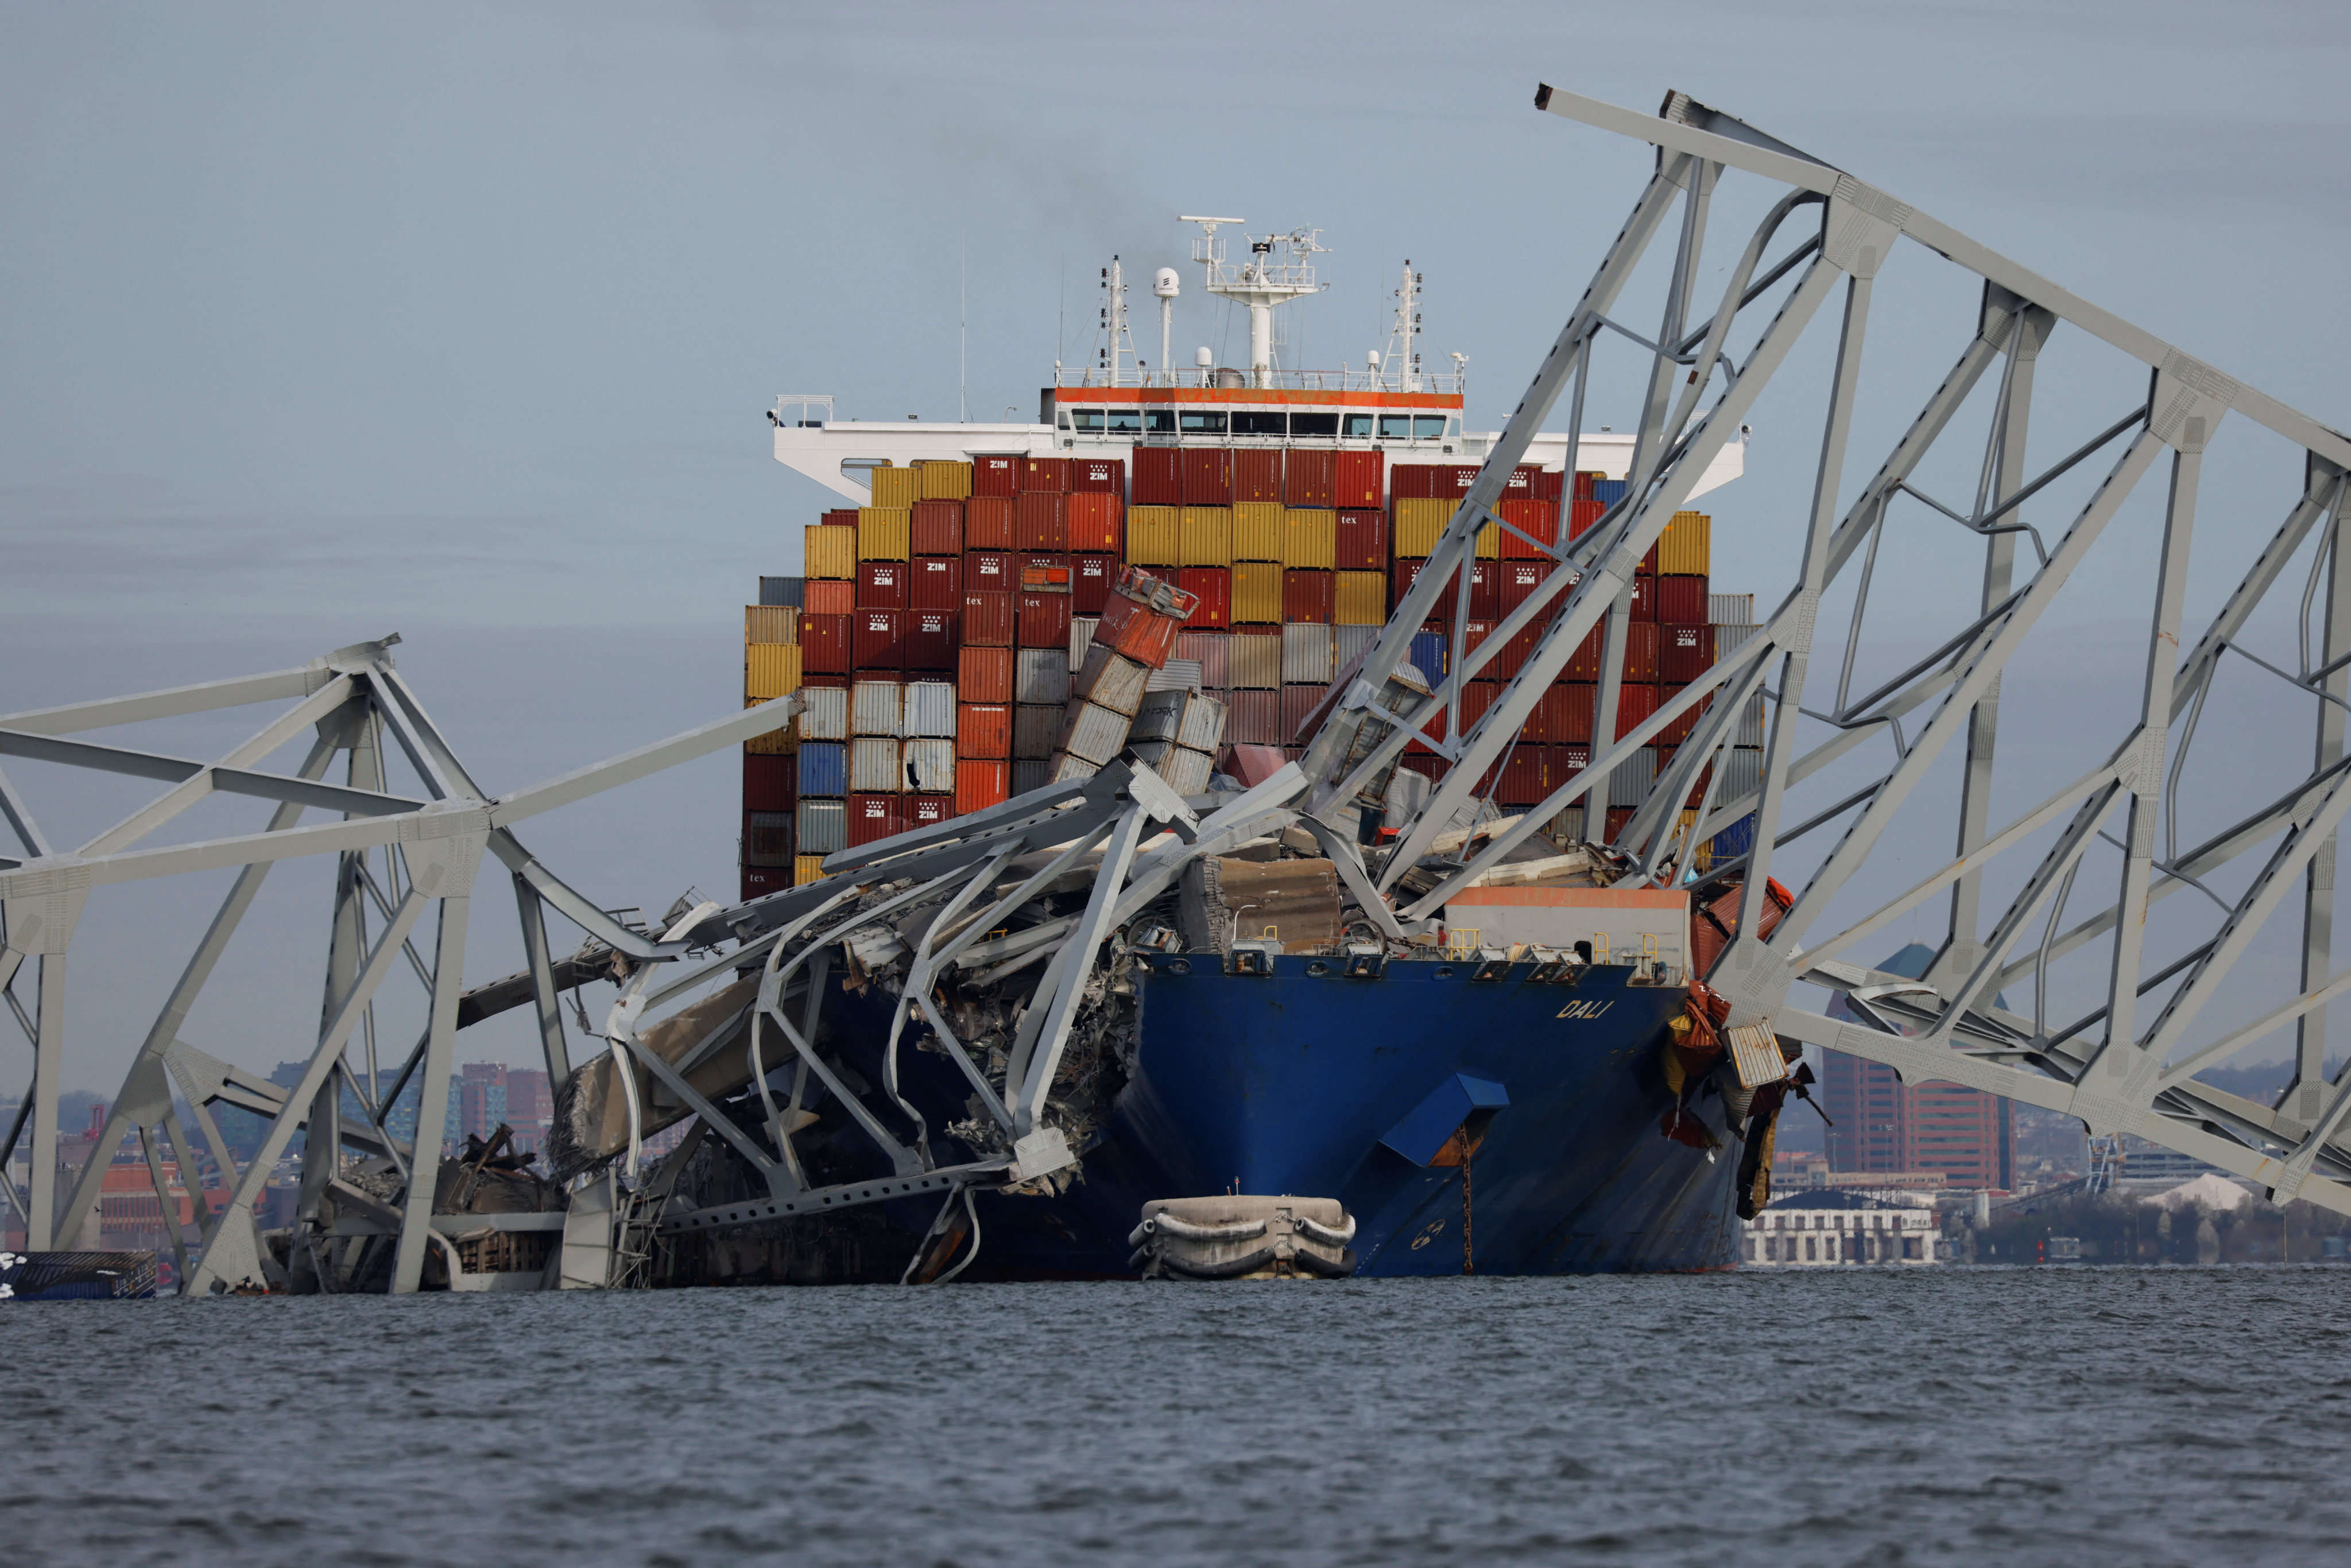 A view of the Dali cargo vessel which crashed into the Francis Scott Key Bridge causing it to collapse in Baltimore, Maryland on Tuesday. Photo: Reuters